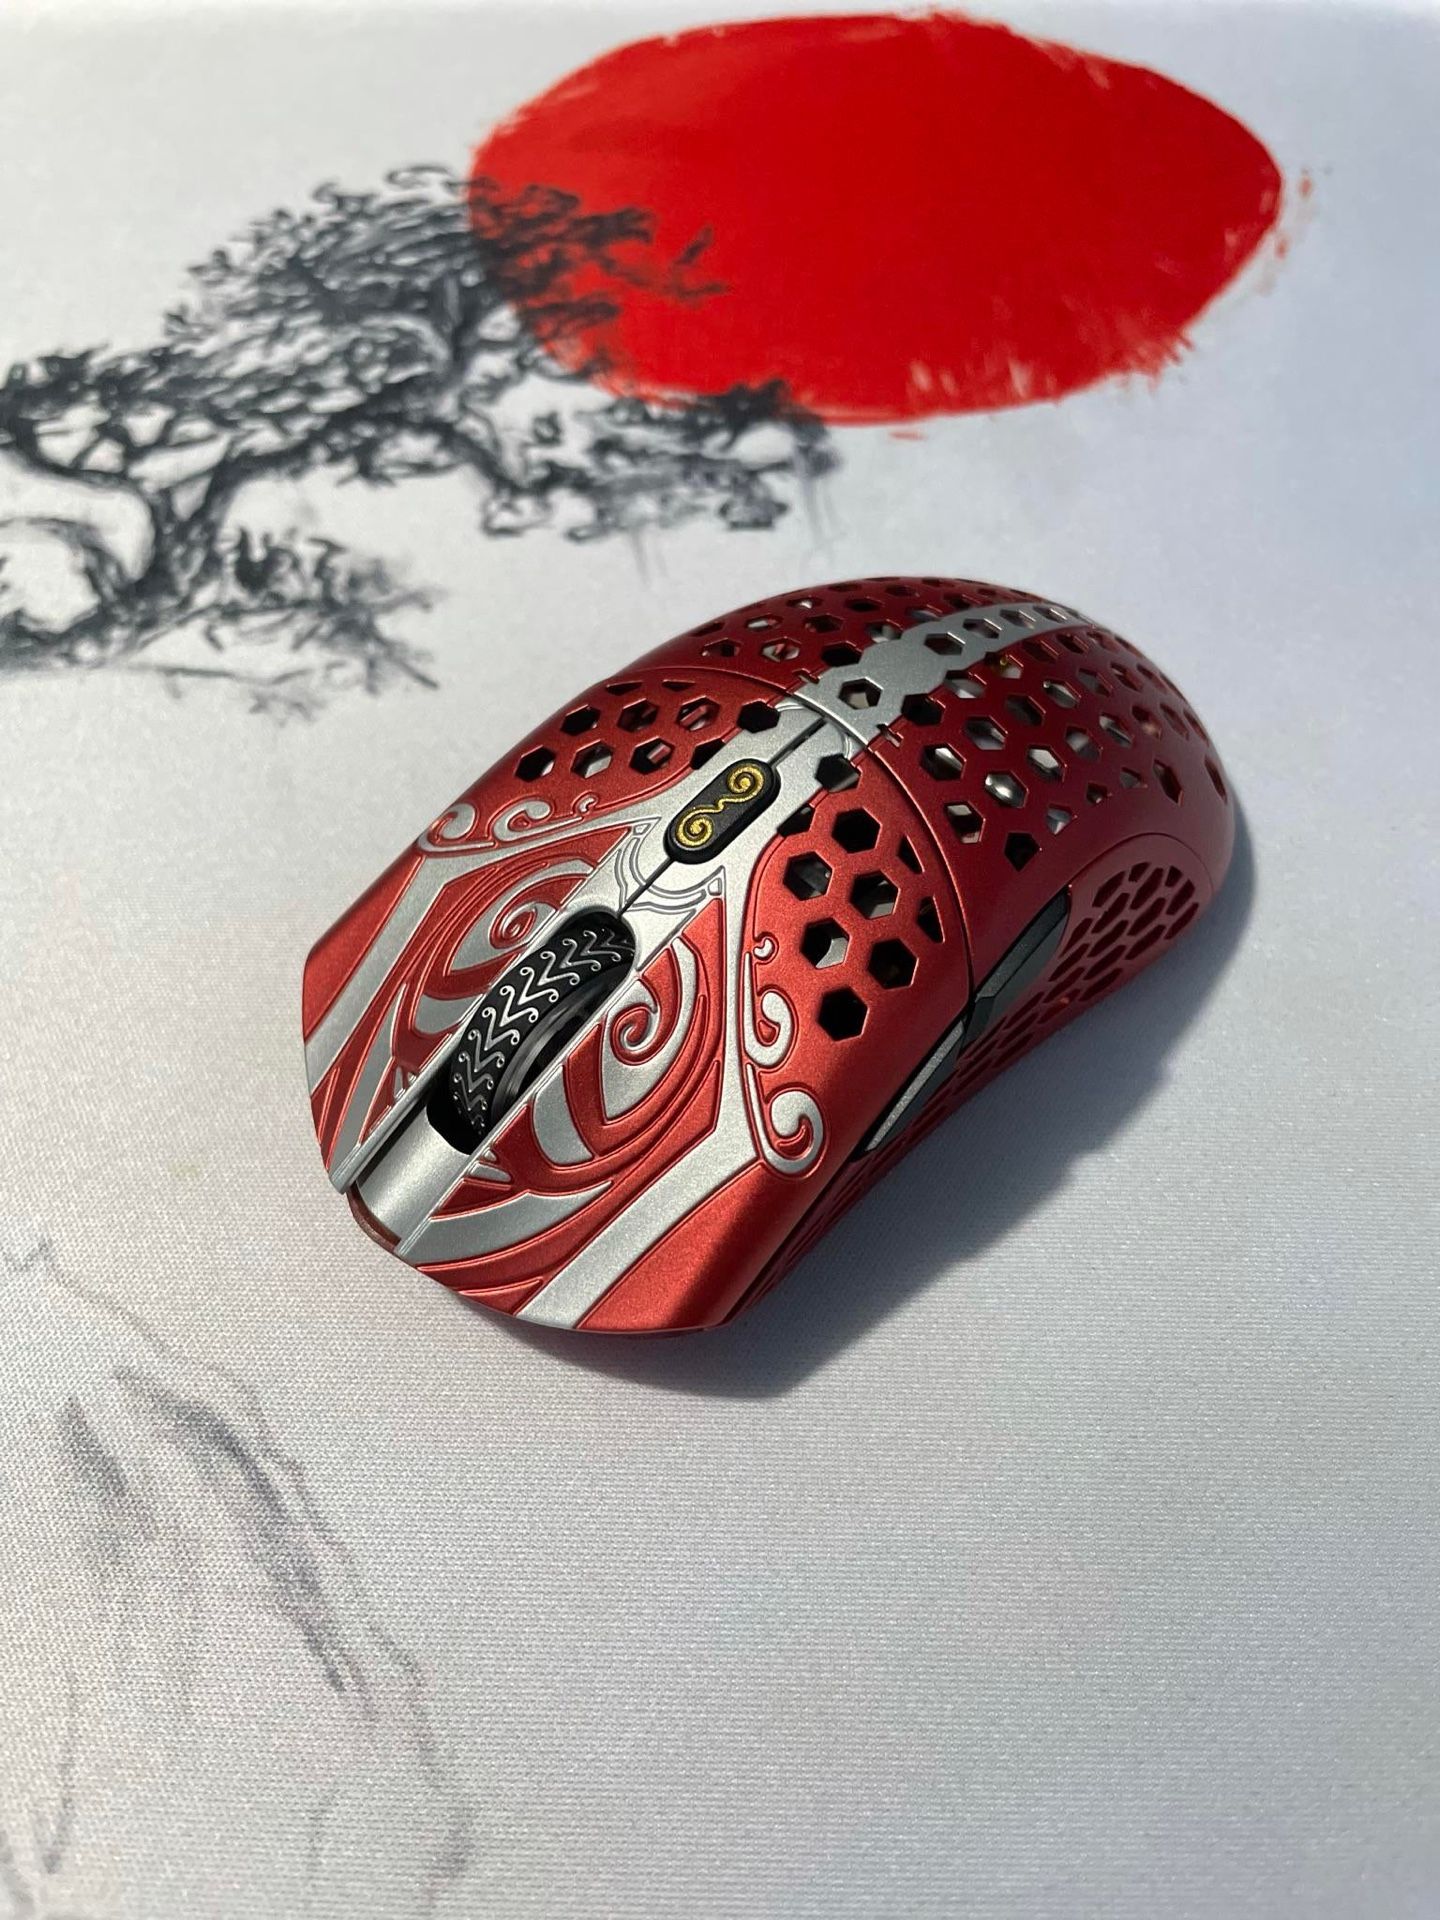 Finalmouse Starlight-12 Ares Small